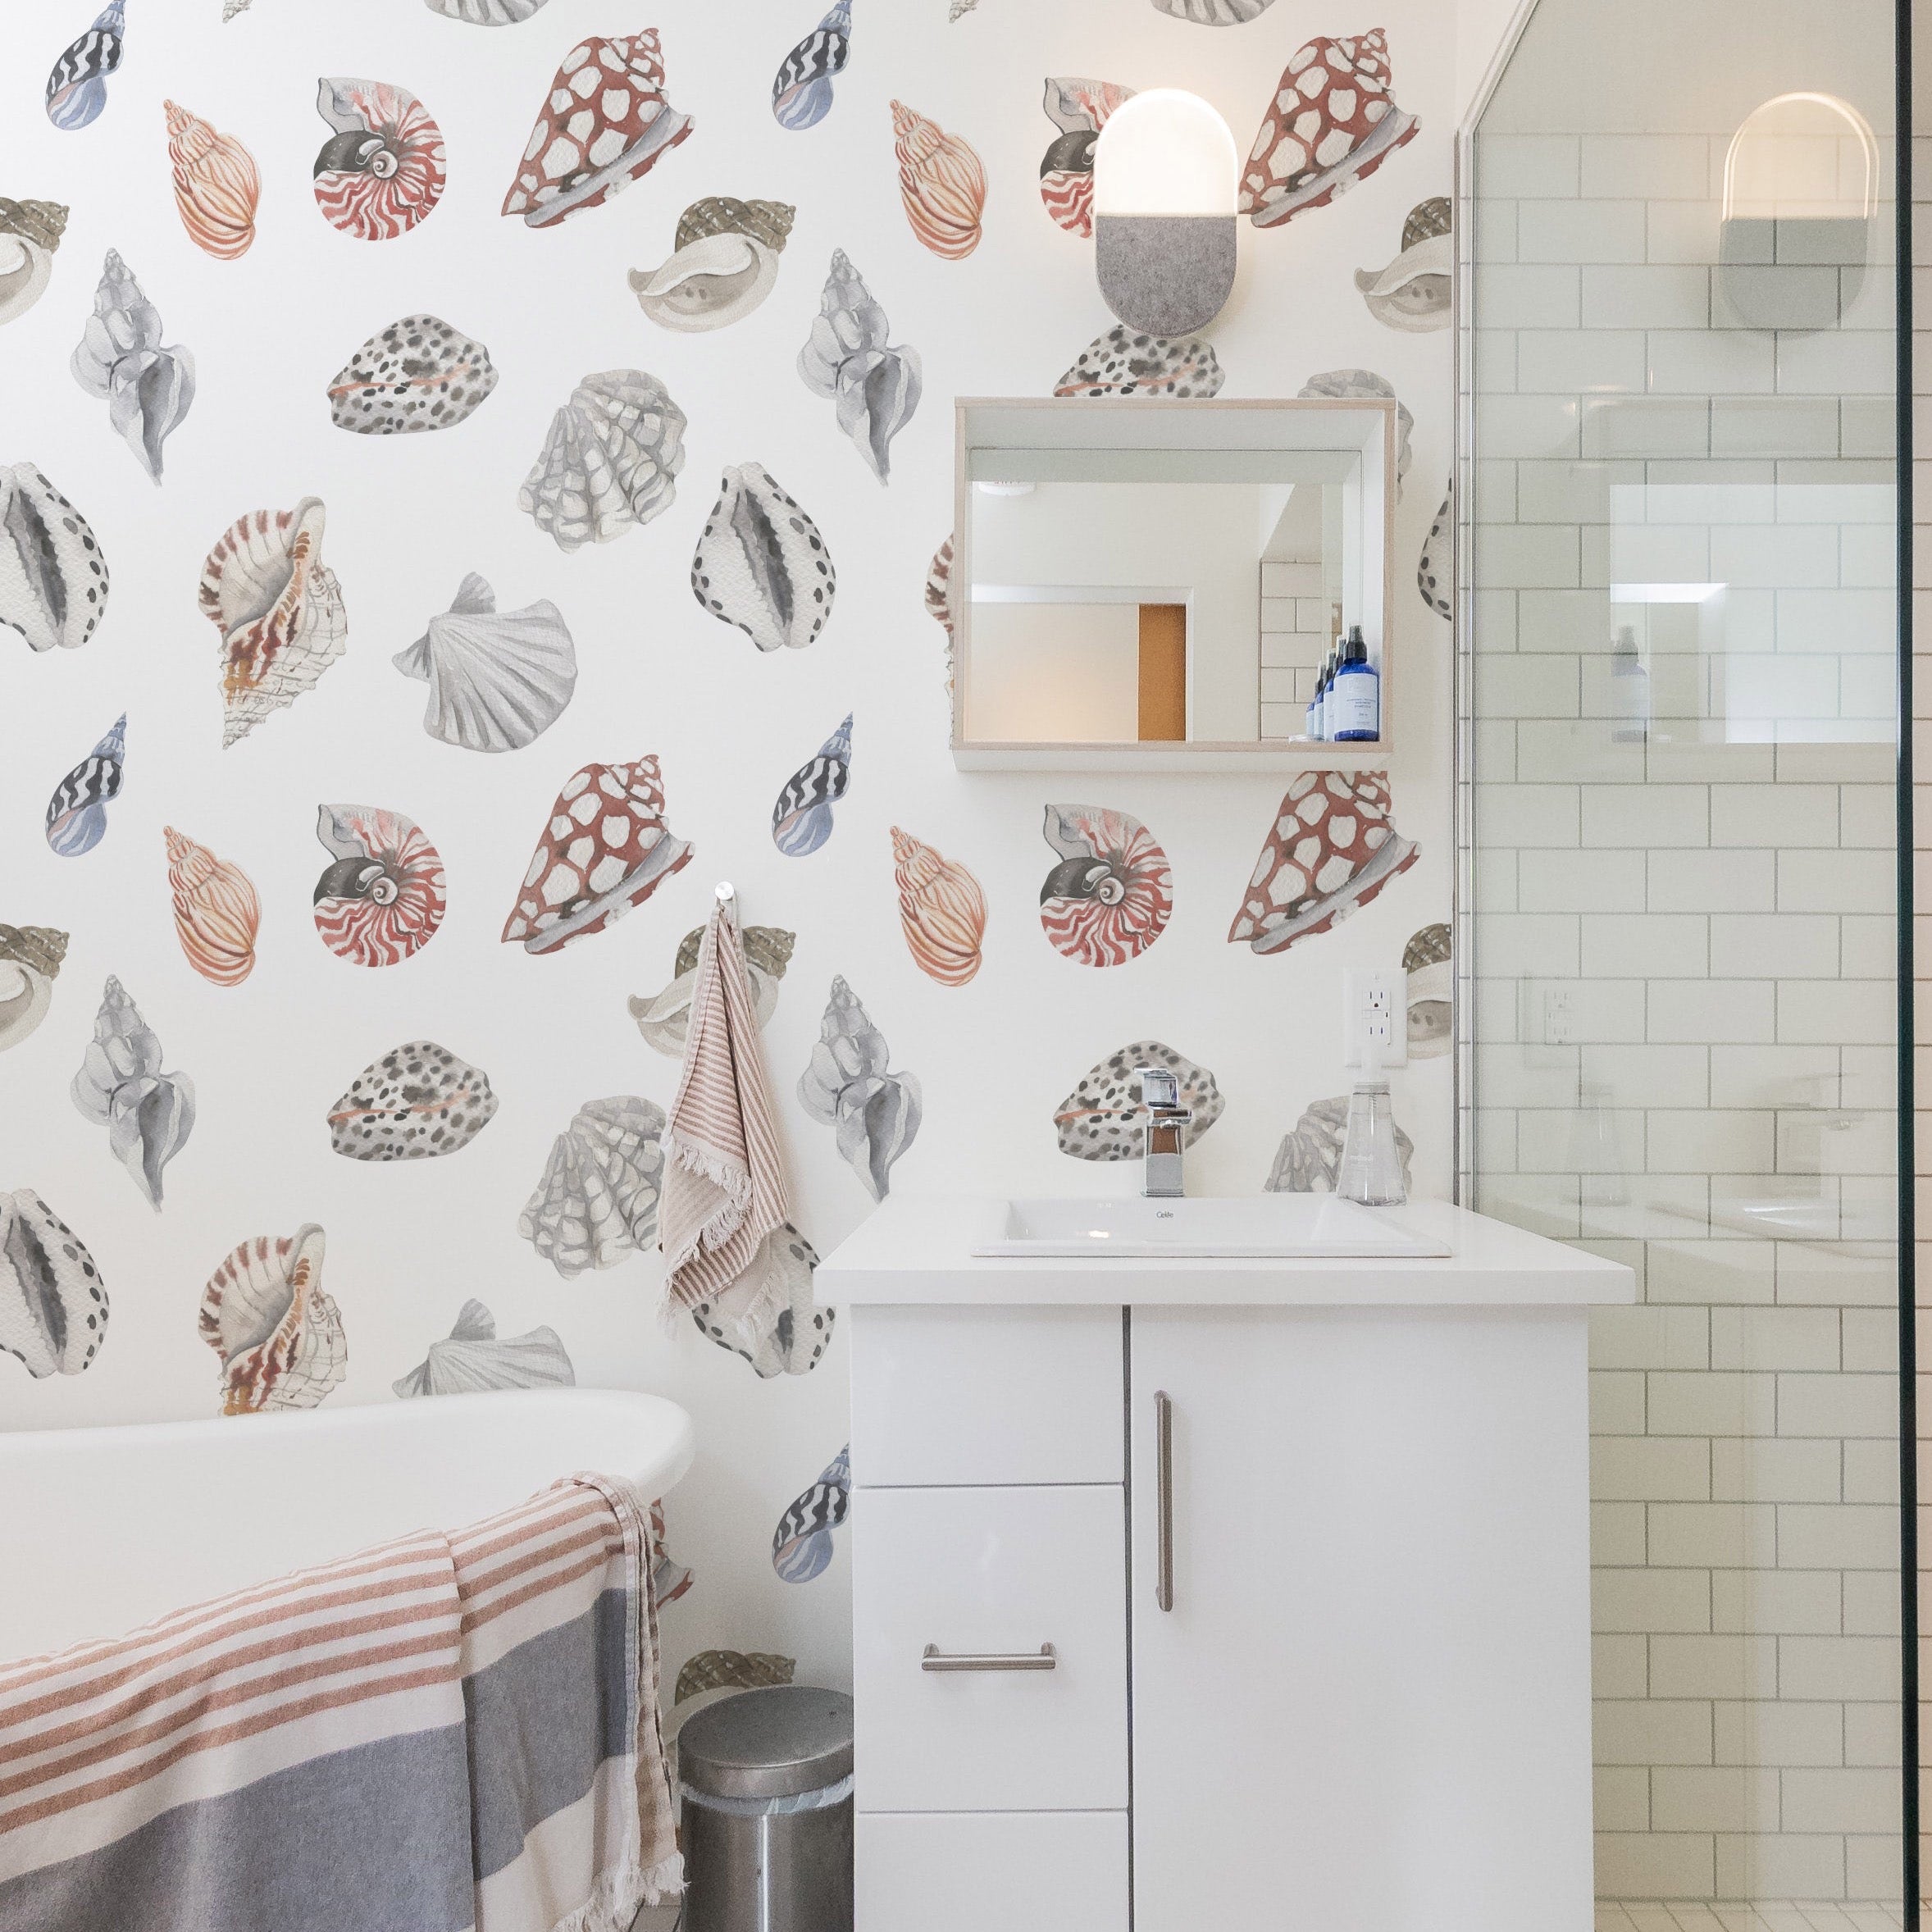 Modern bathroom decorated with watercolor seashell wallpaper and minimalist white vanity